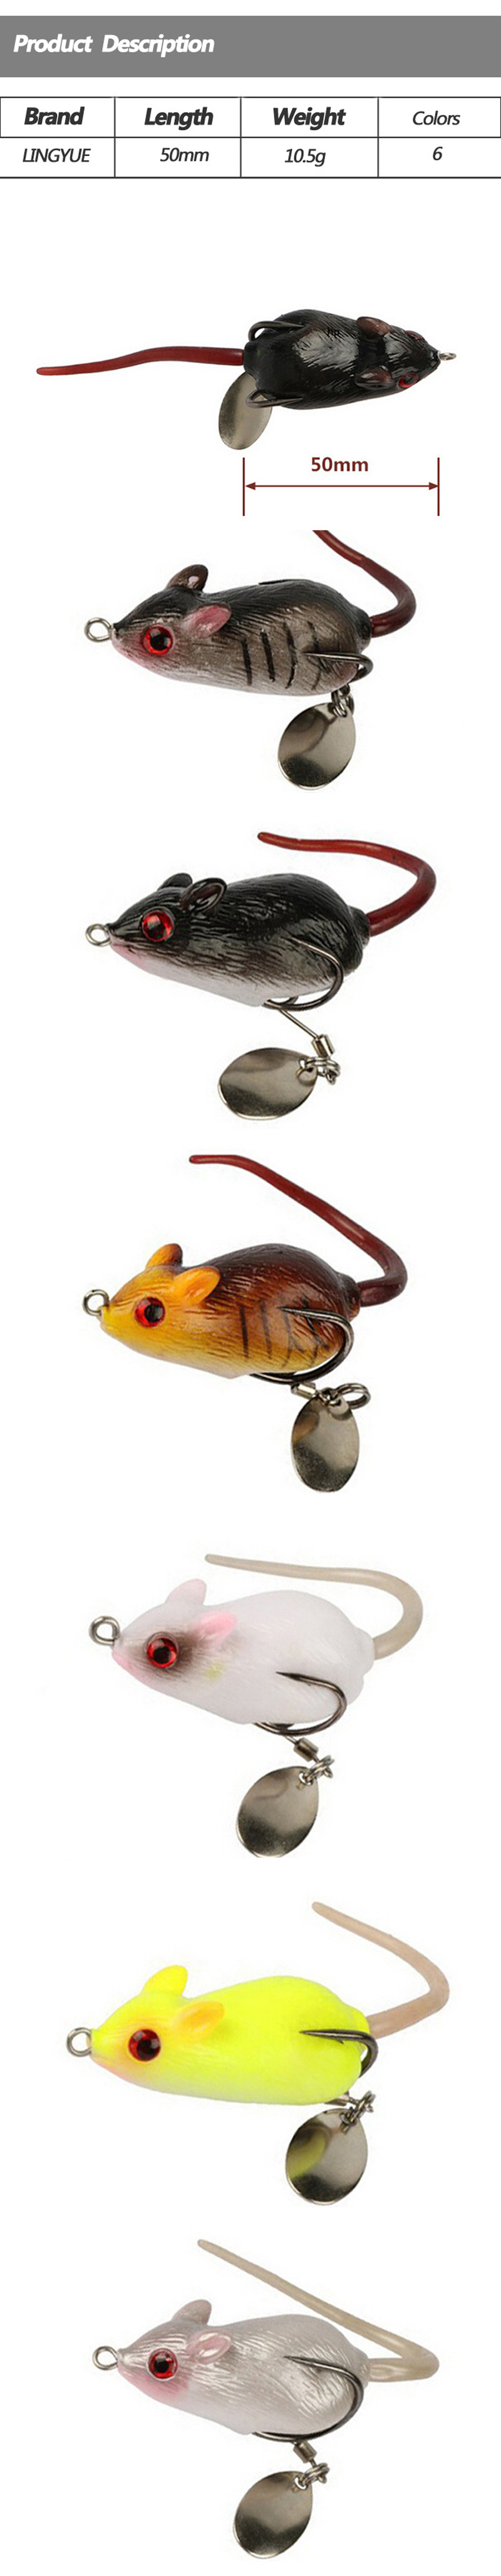 Y118-5cm-105g-3D-Eyes-Soft-Mouse-Bait-Bells-Sound-Fishing-Lure-Frog-Silicon-Artificial-Bait-1351183-8